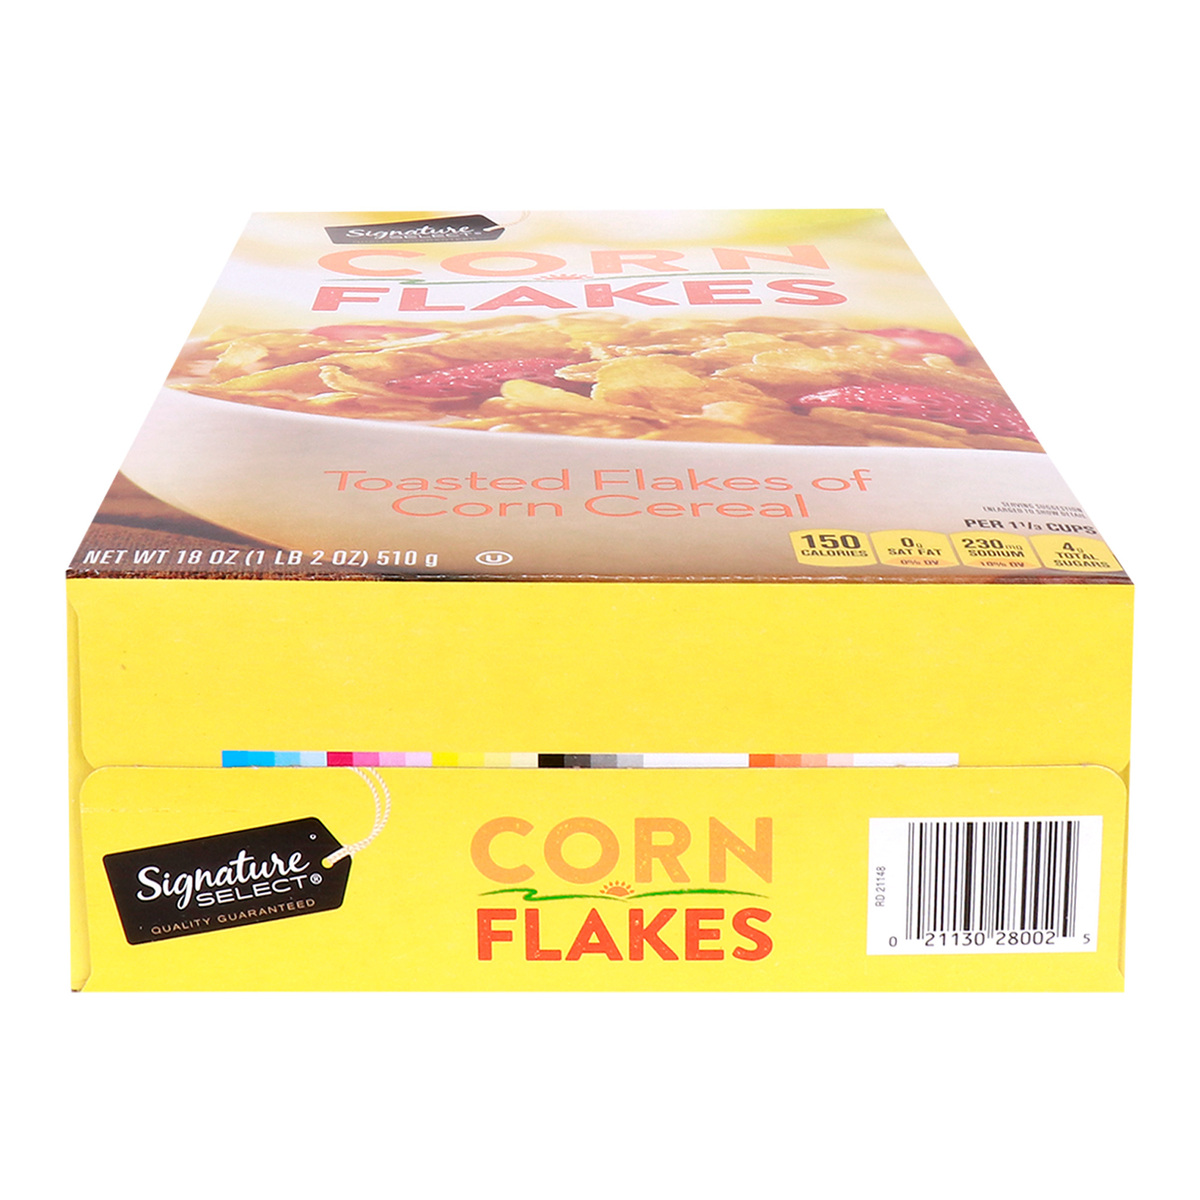 Signature Select Toasted Flakes Of Corn Cereal 510g